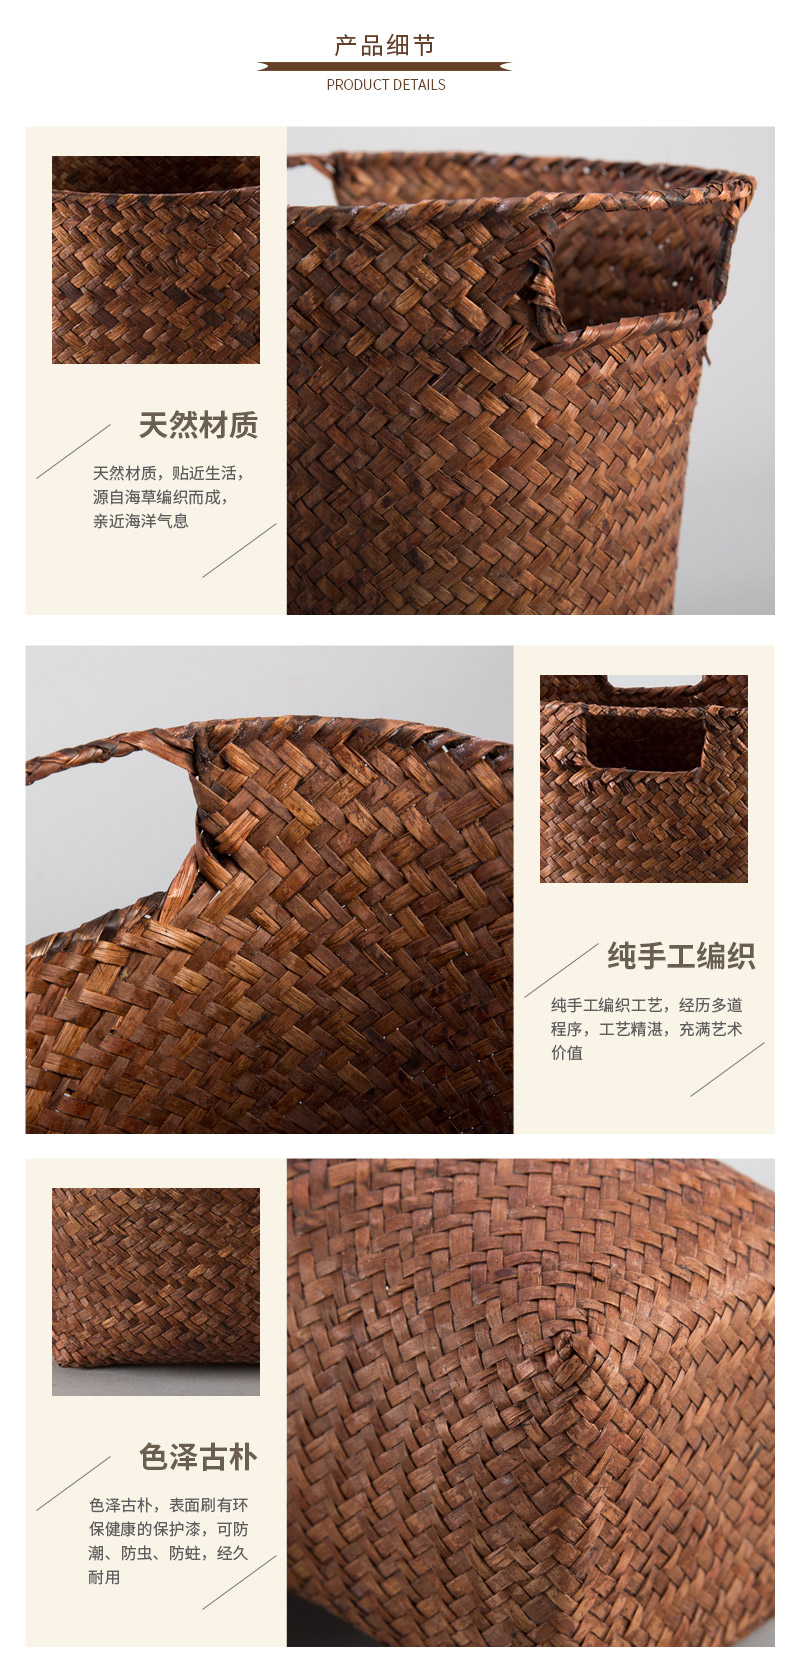 Simple woven straw seaweed collection basket straw storage basket four piece4